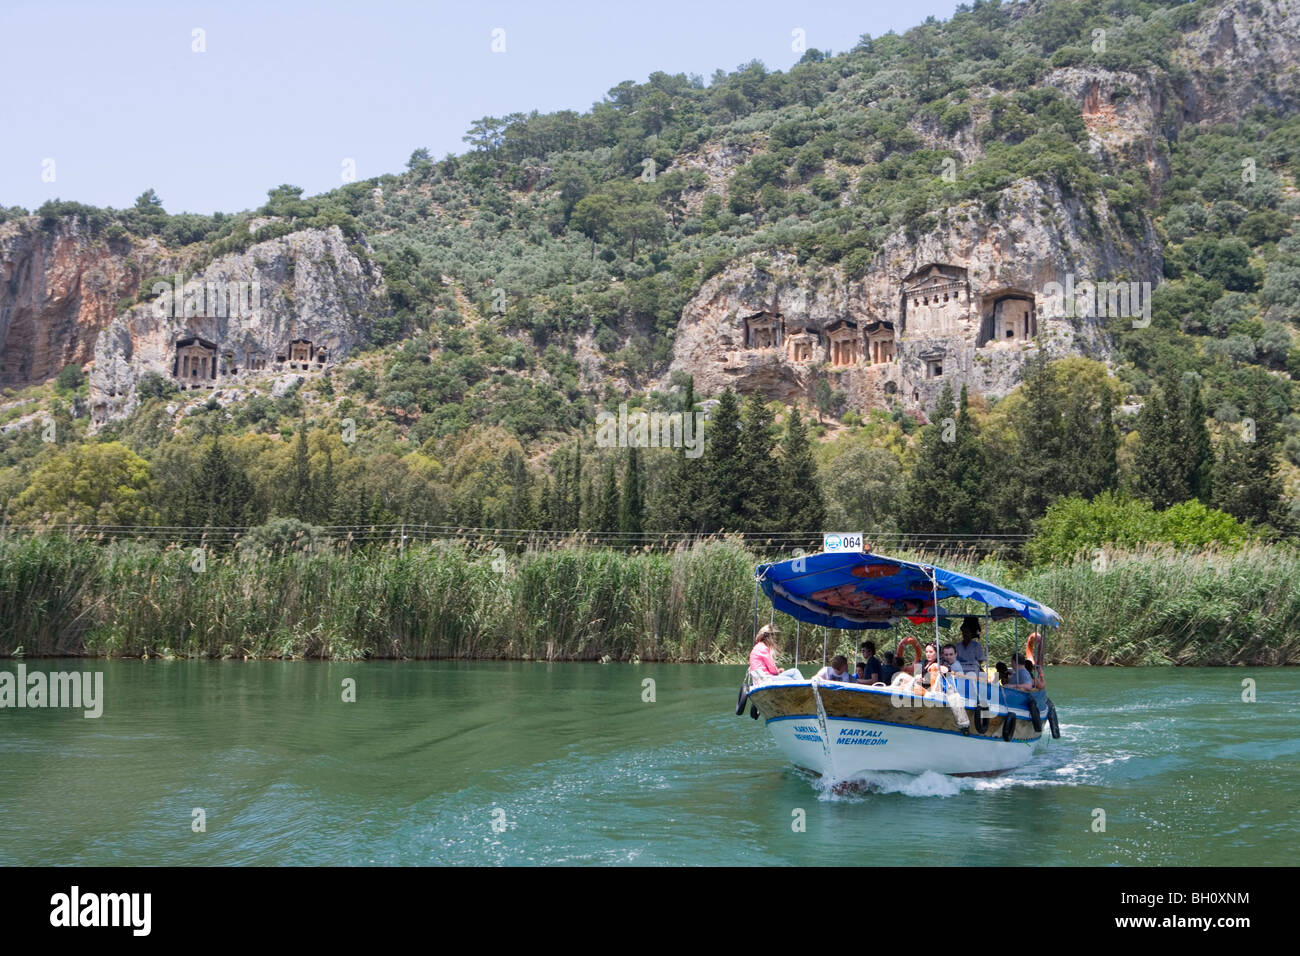 Excursion boat on the Dalyan river and Lycian Cliff Tombs, Dalyan River, Turkey, Europe Stock Photo